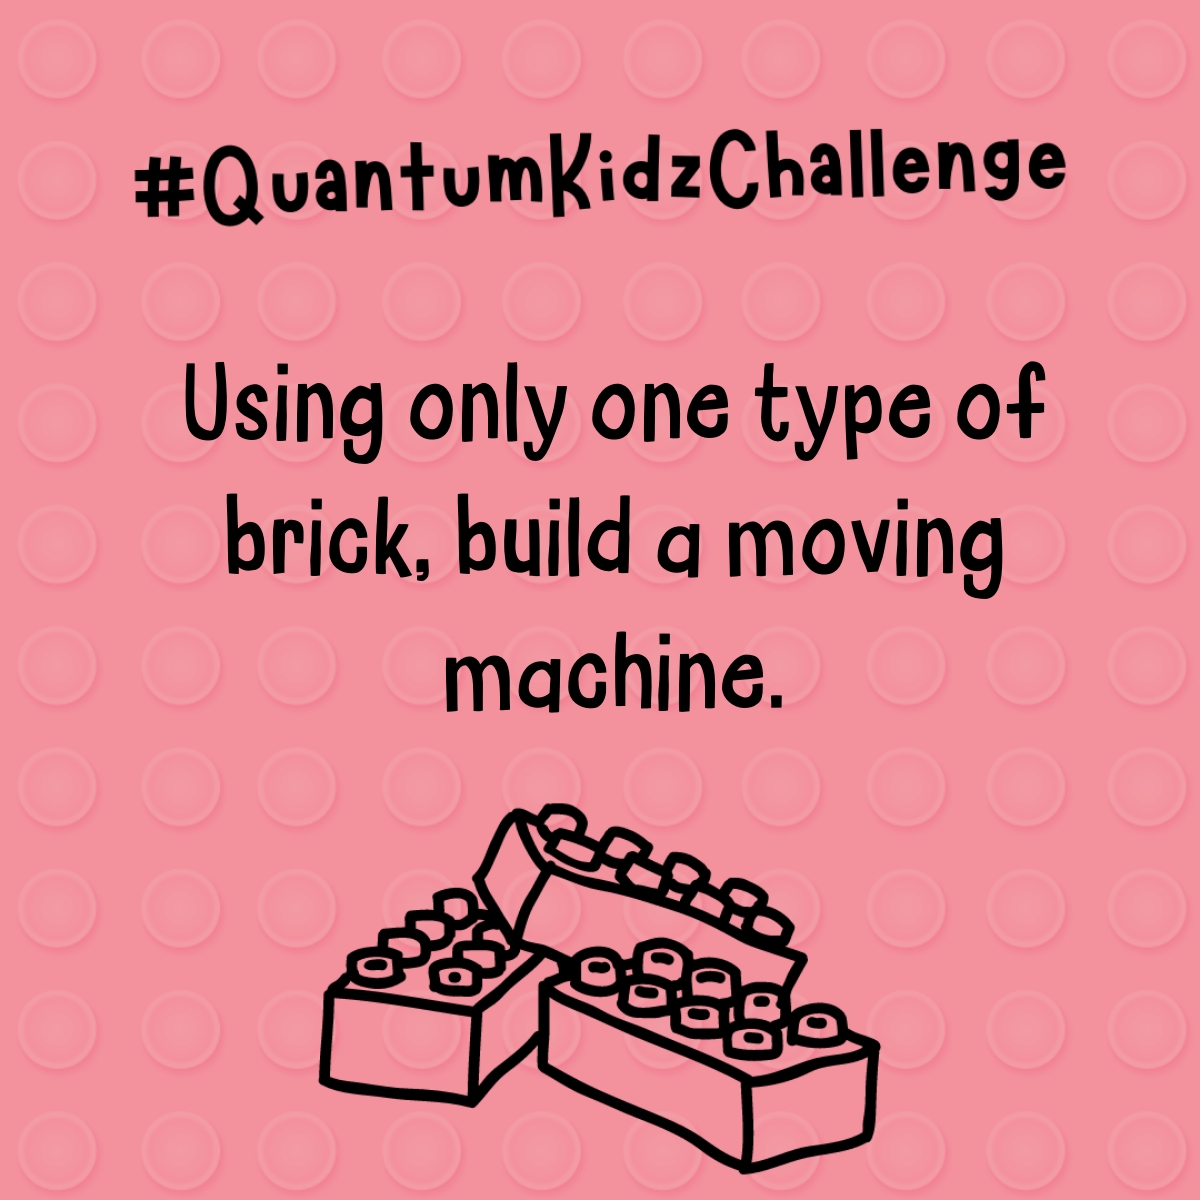 Inspire your kiddos to ignite their creativity & explore this fun STEAM challenge! Snap a picture of your kiddo's finished work and tag it with #QuantumKidzChallenge. https://t.co/EhgnhW431I